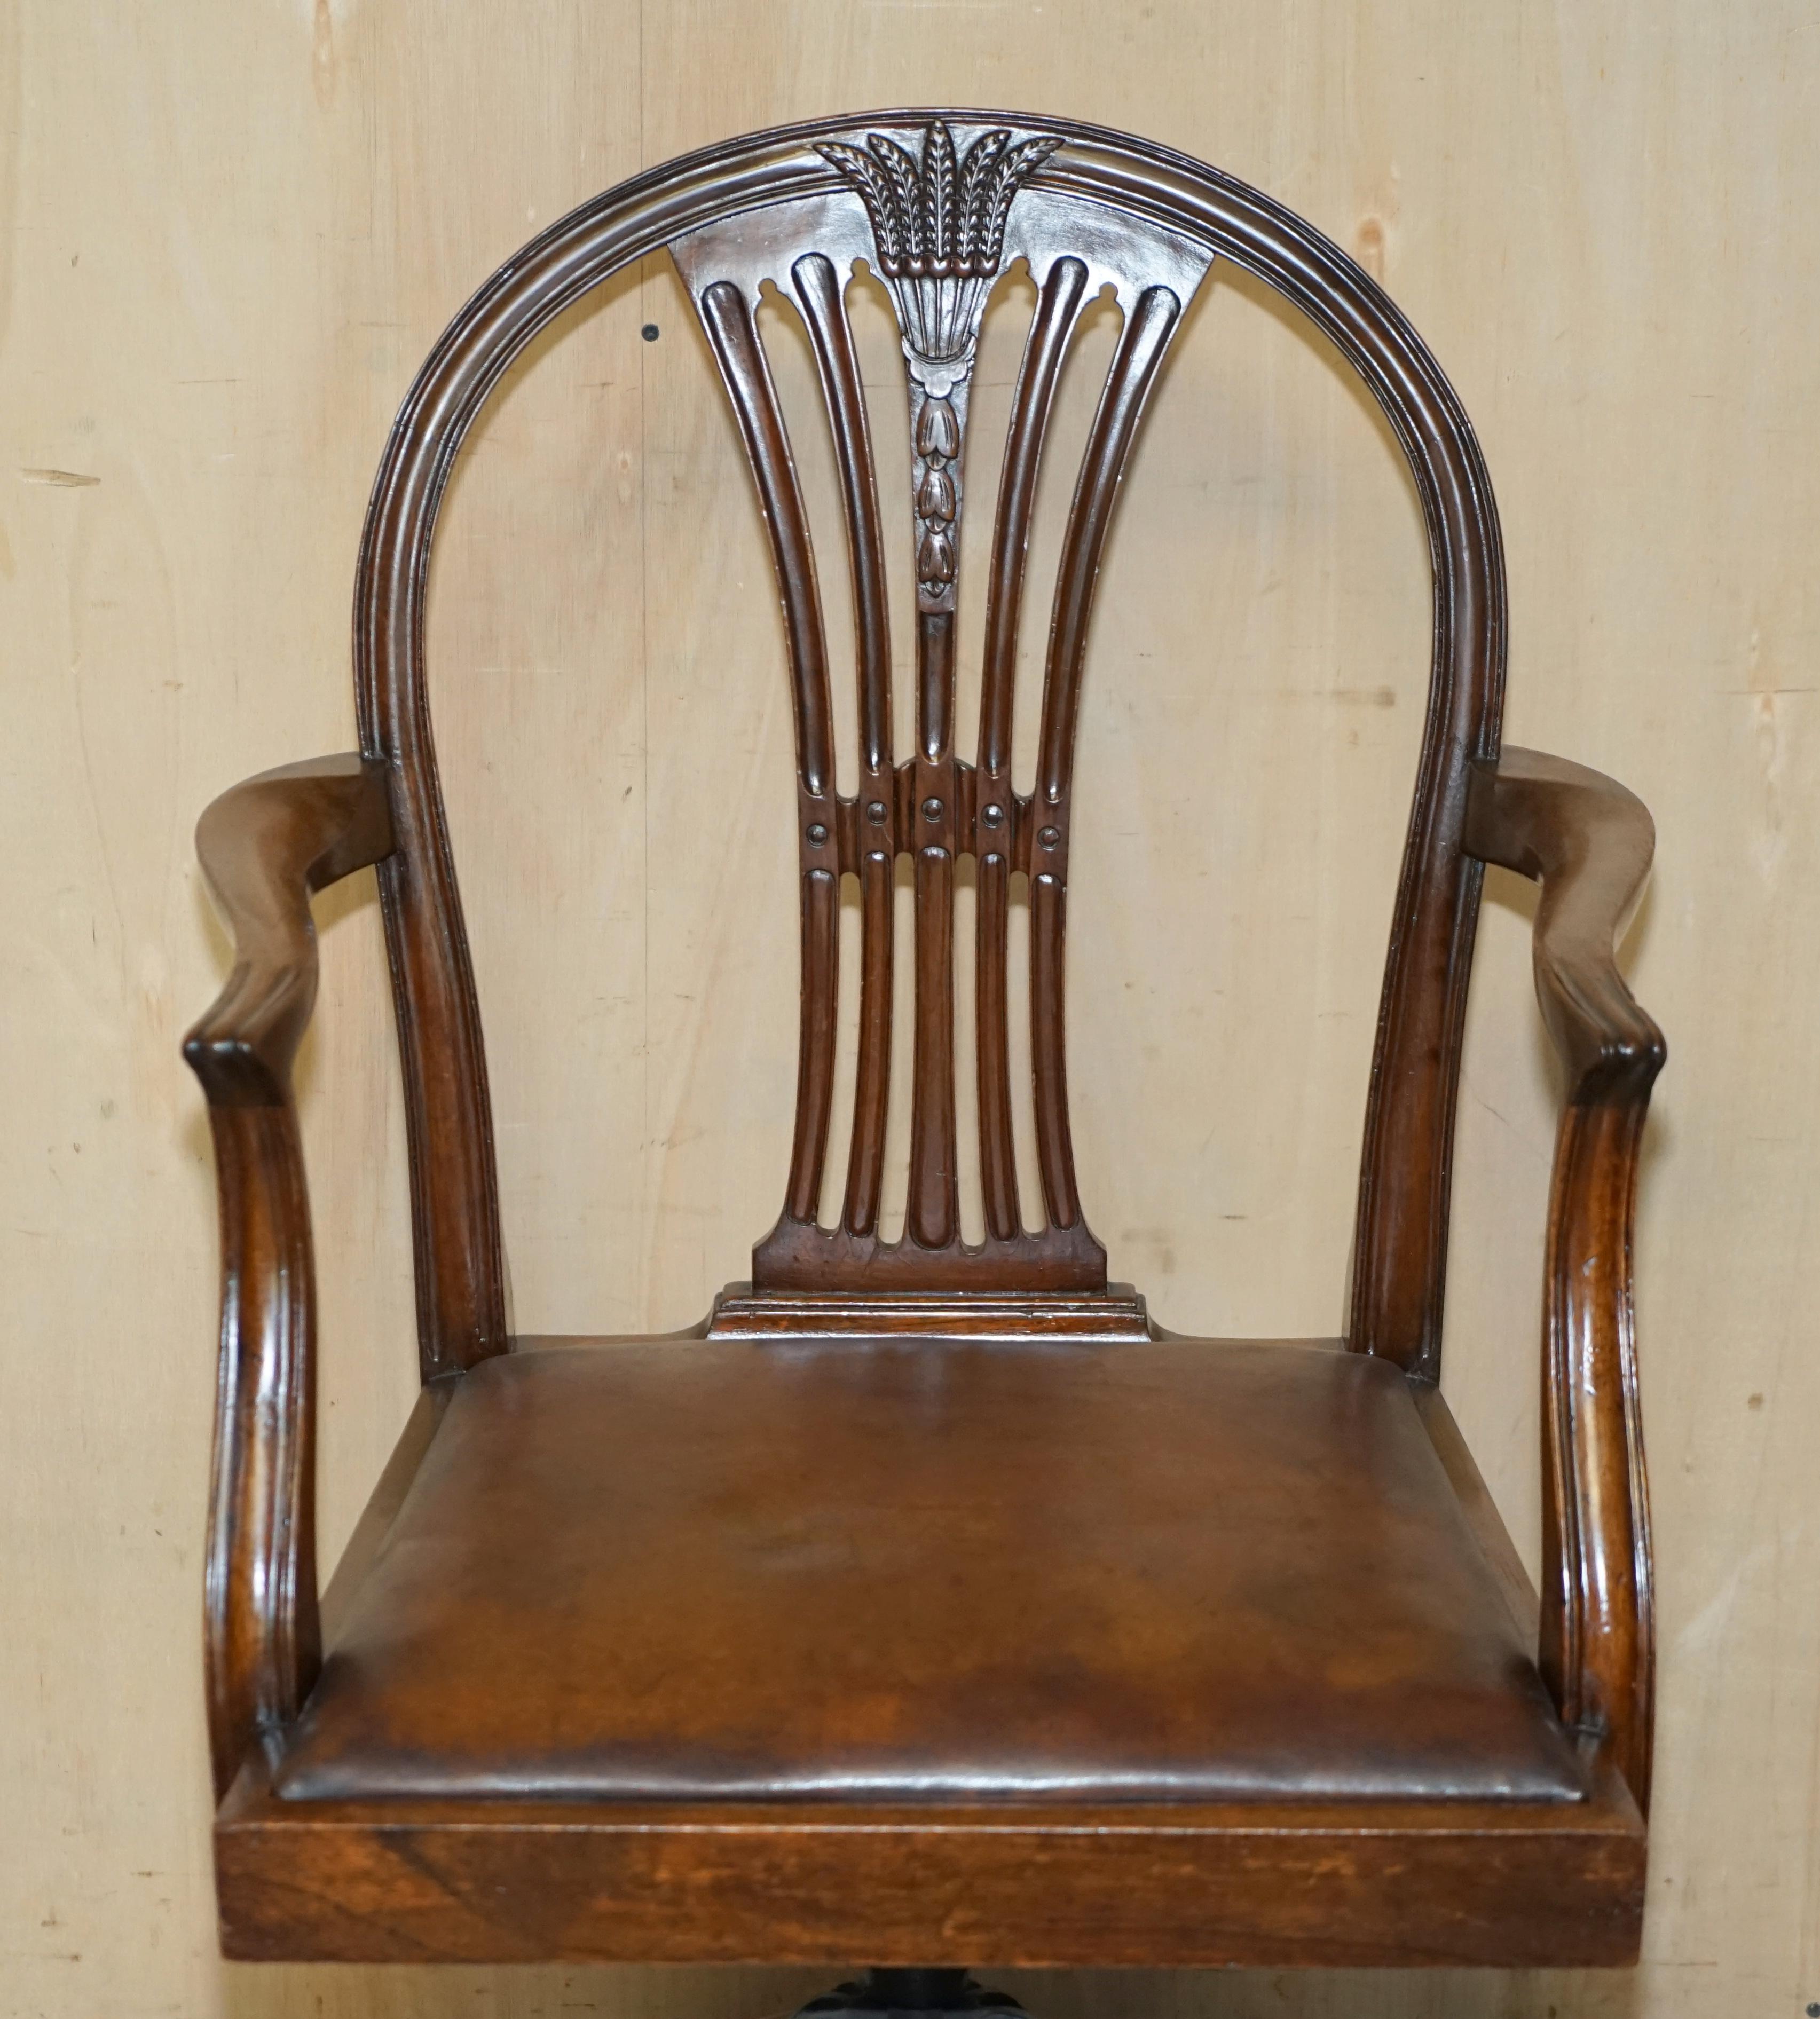 High Victorian Unique Antique 1880 George Hepplewhite Wheatgrass Captains Chair Brown Leather For Sale